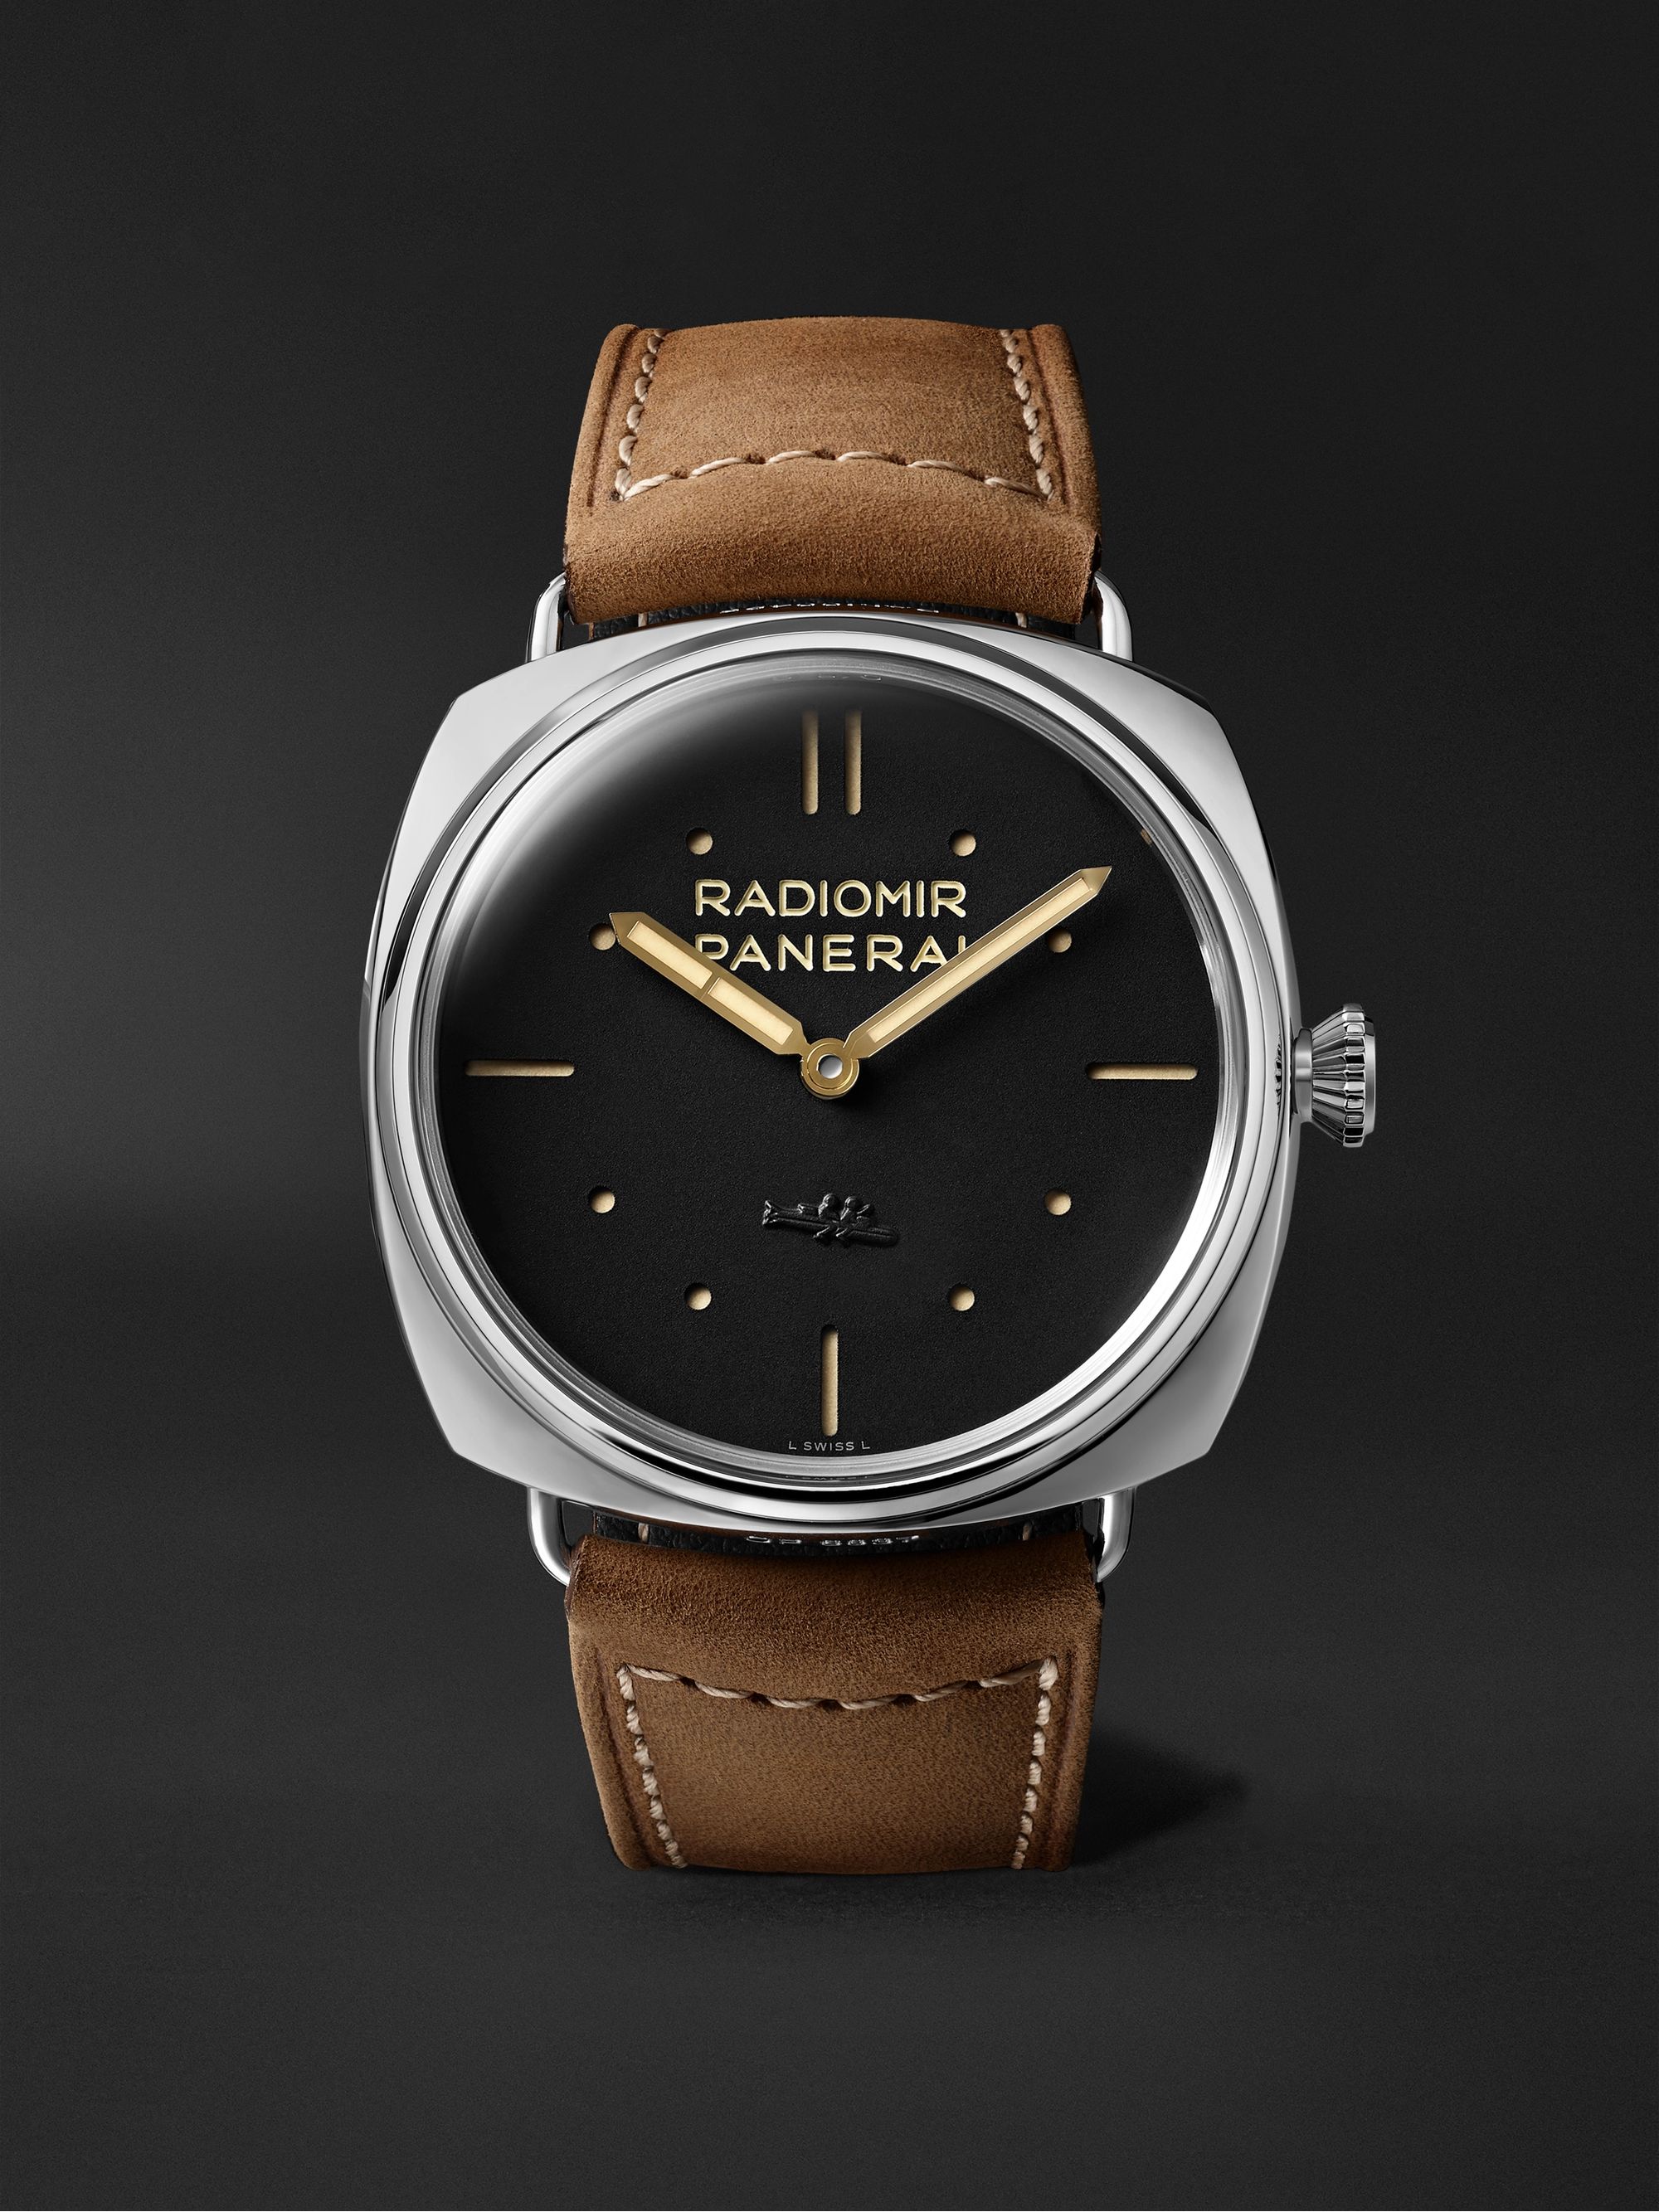 PANERAI Radiomir S.L.C. 3 Days Acciaio Hand-Wound 47mm Steel and Leather Watch, Ref. No. PAM00425